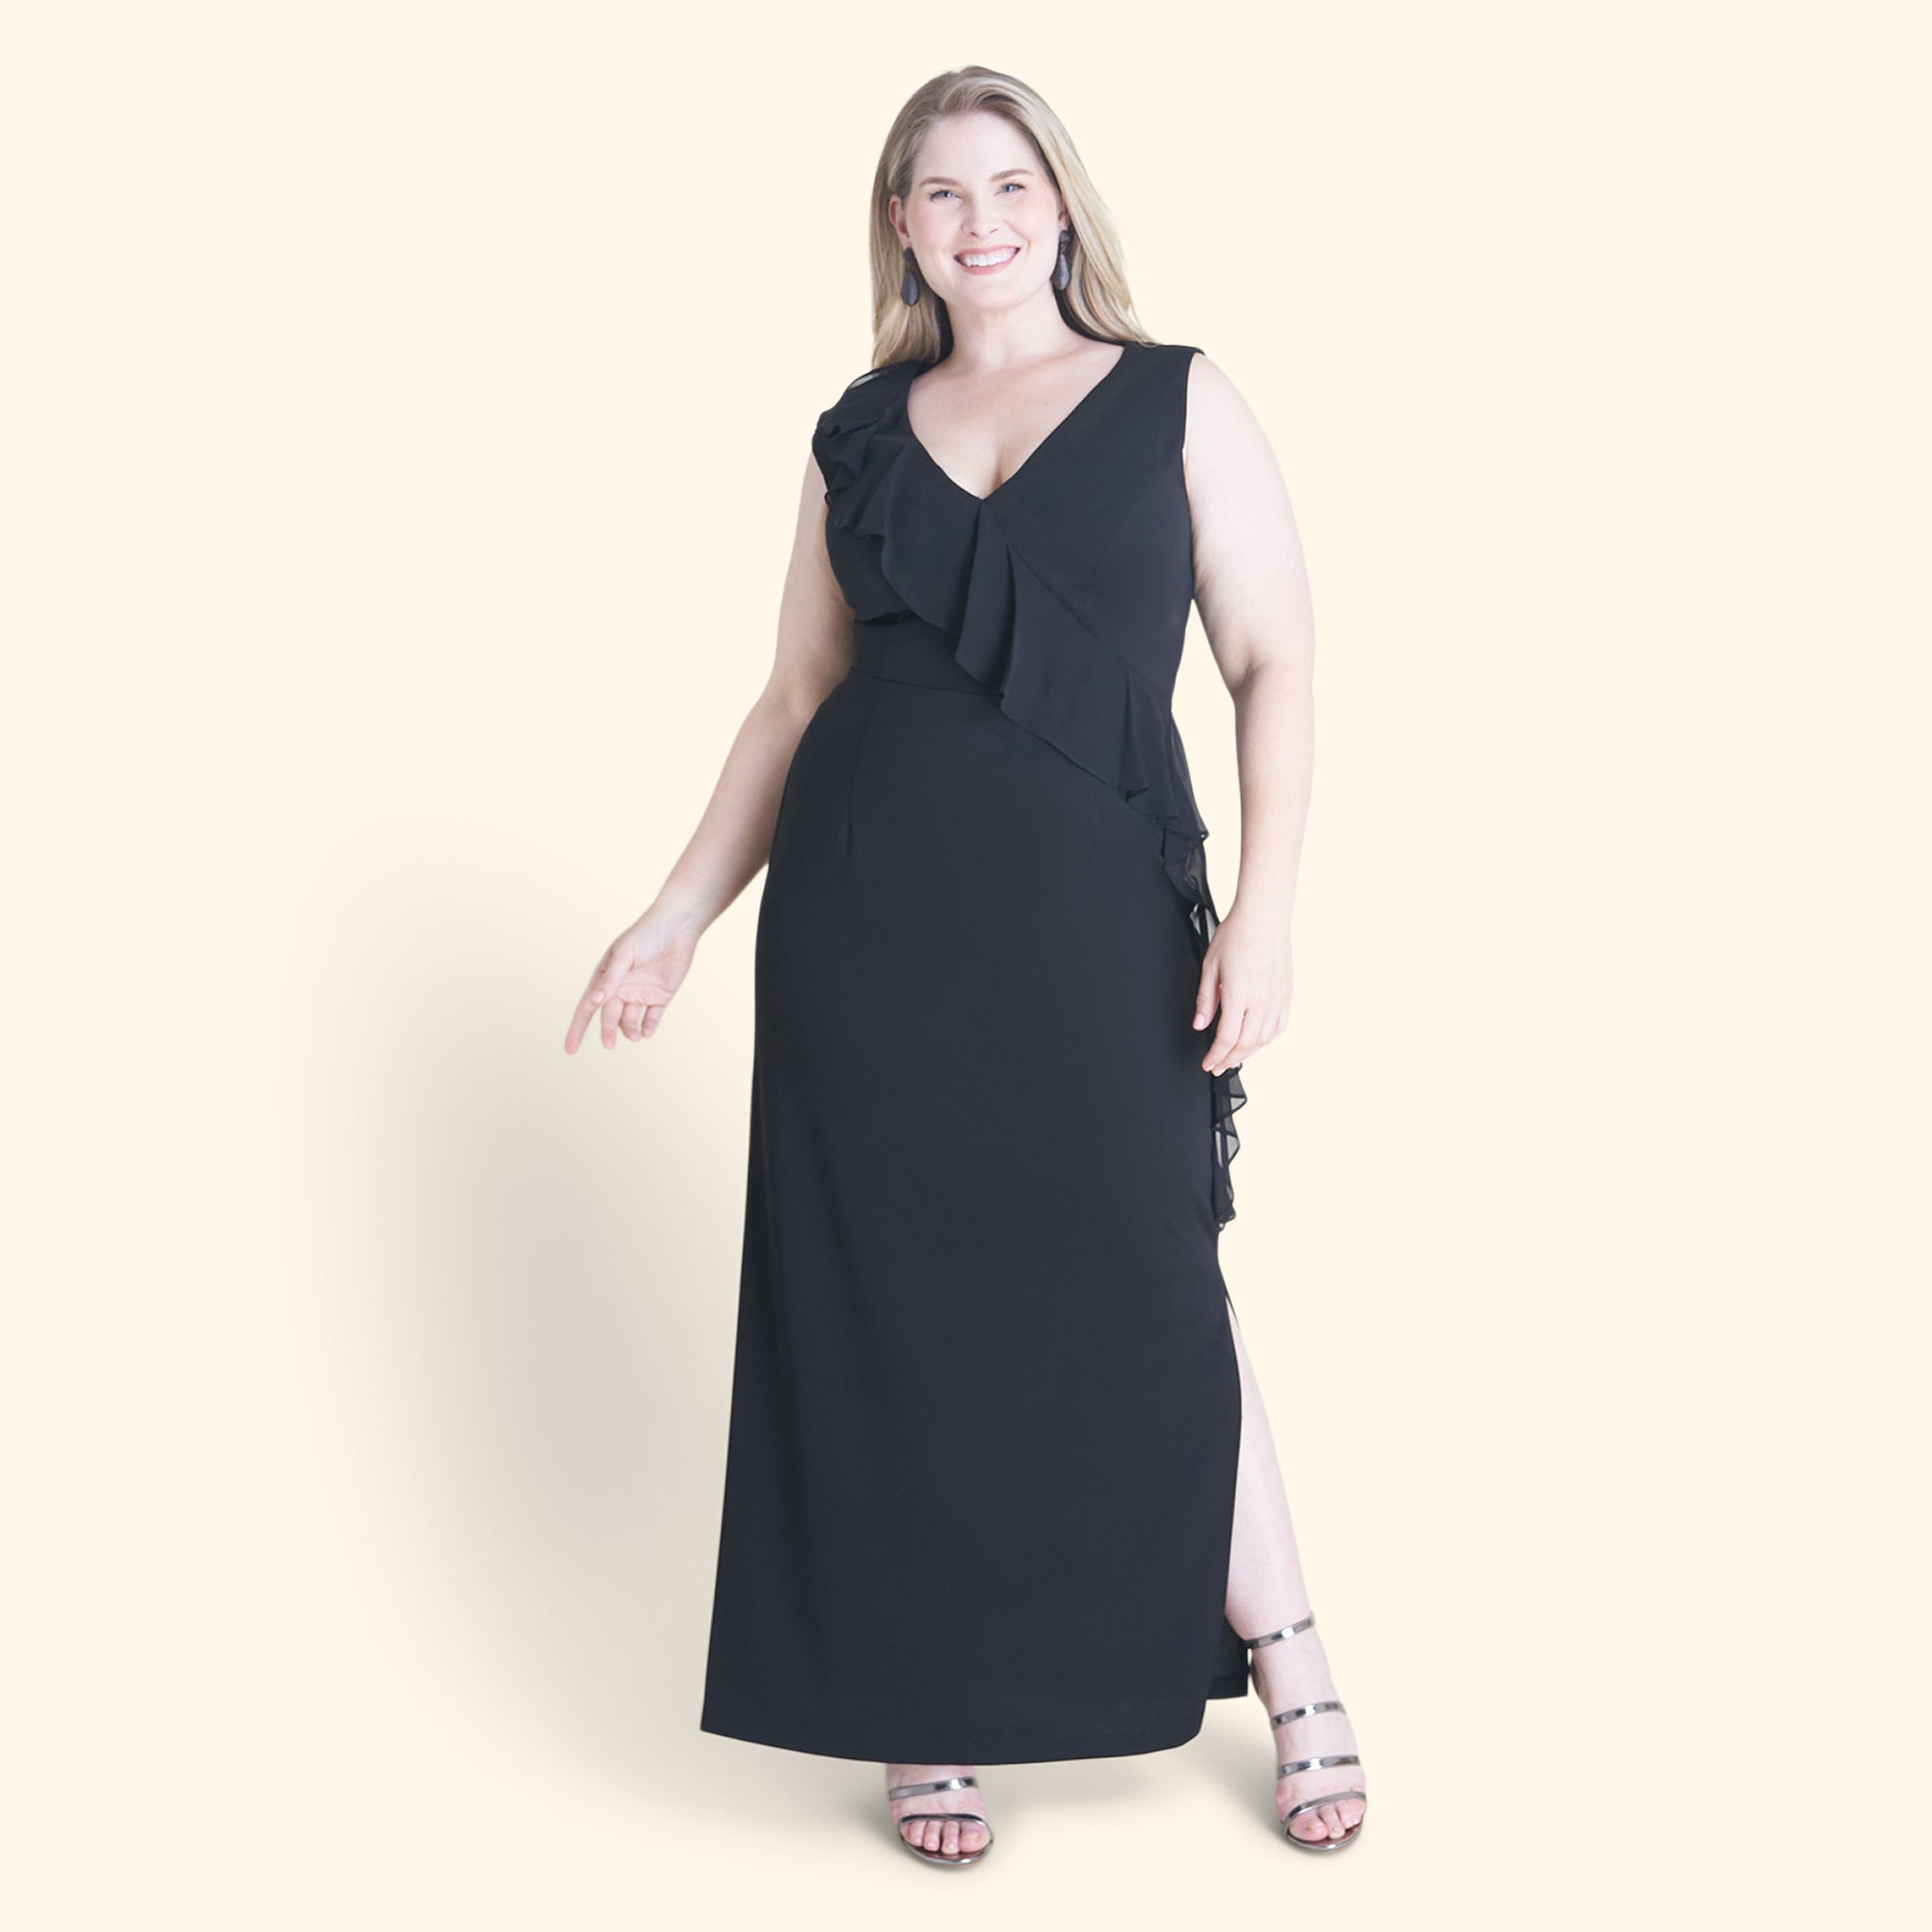 Woman posing wearing Black Sara 2.0 Floor-Length Dress from Connected Apparel